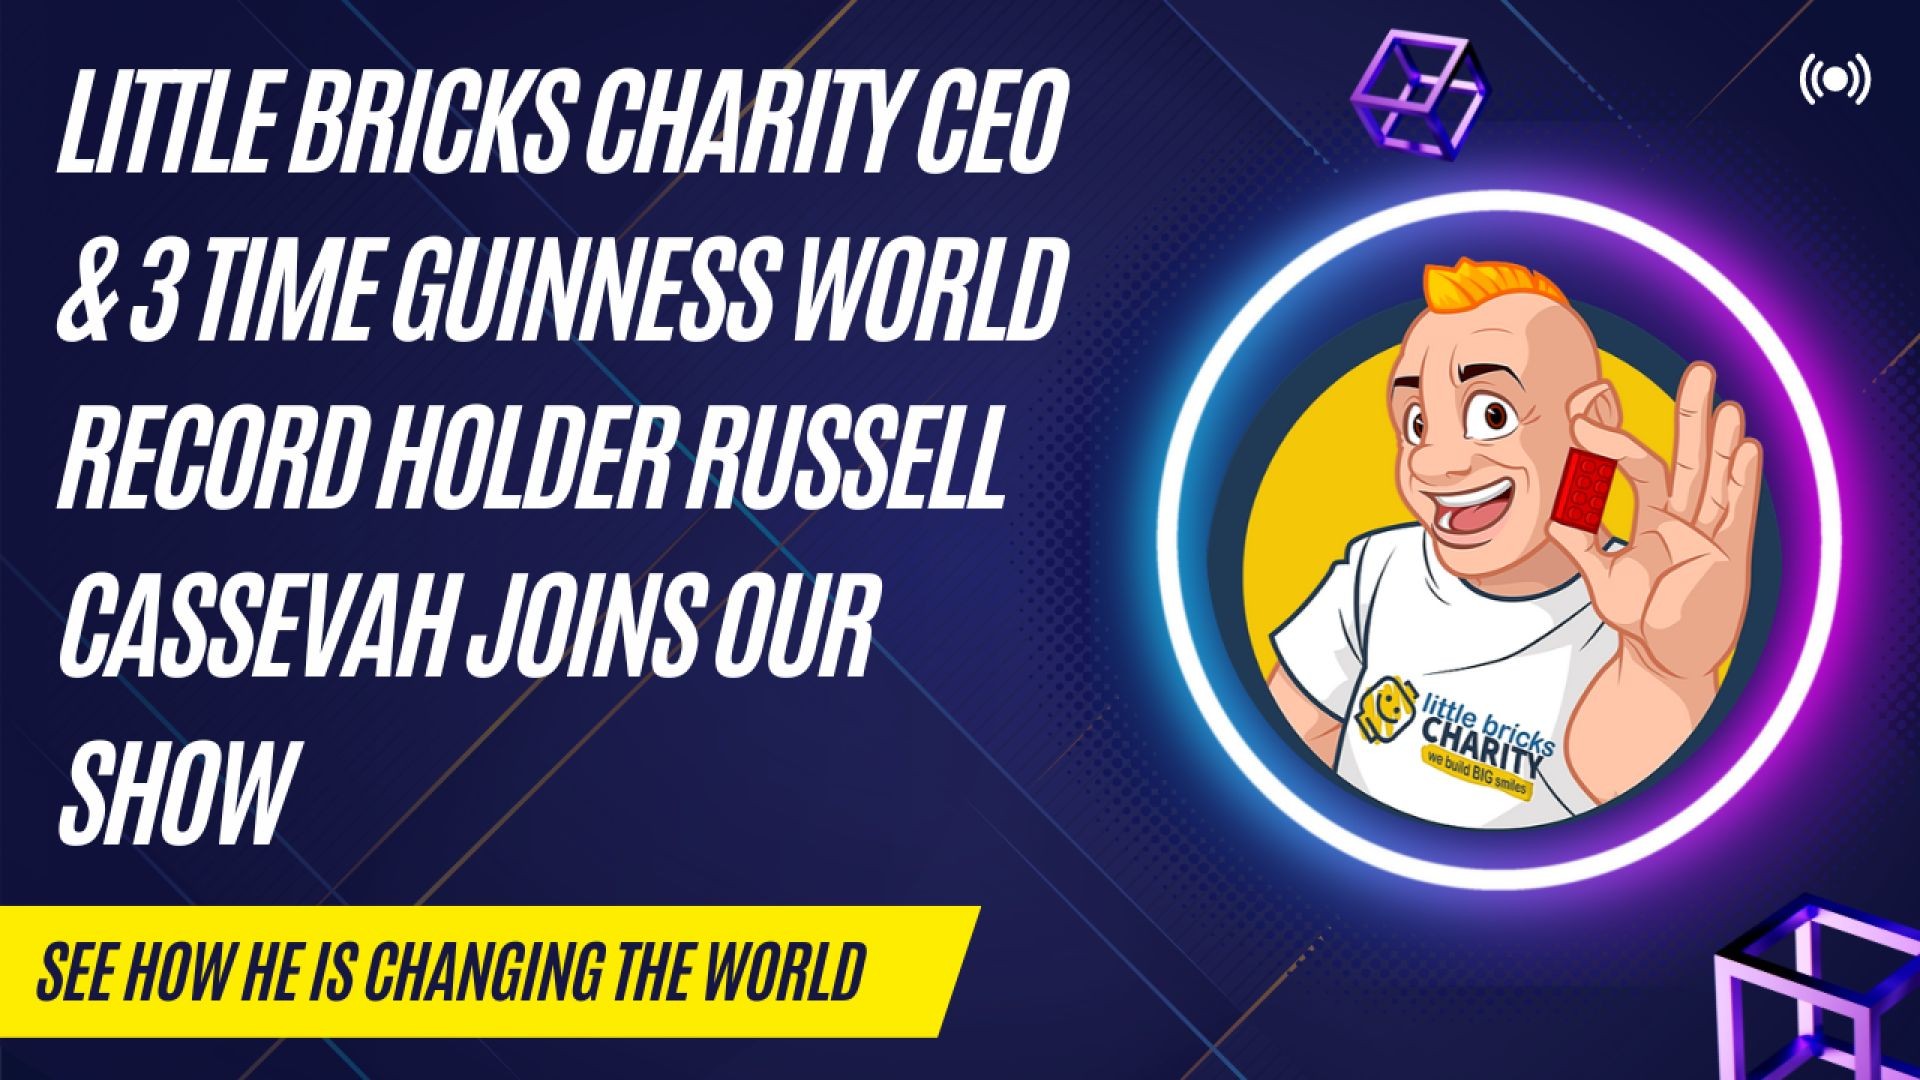 ⁣Little Bricks Charity CEO & 3 Time Guinness World Record Holder Russell Cassevah Joins Our Show